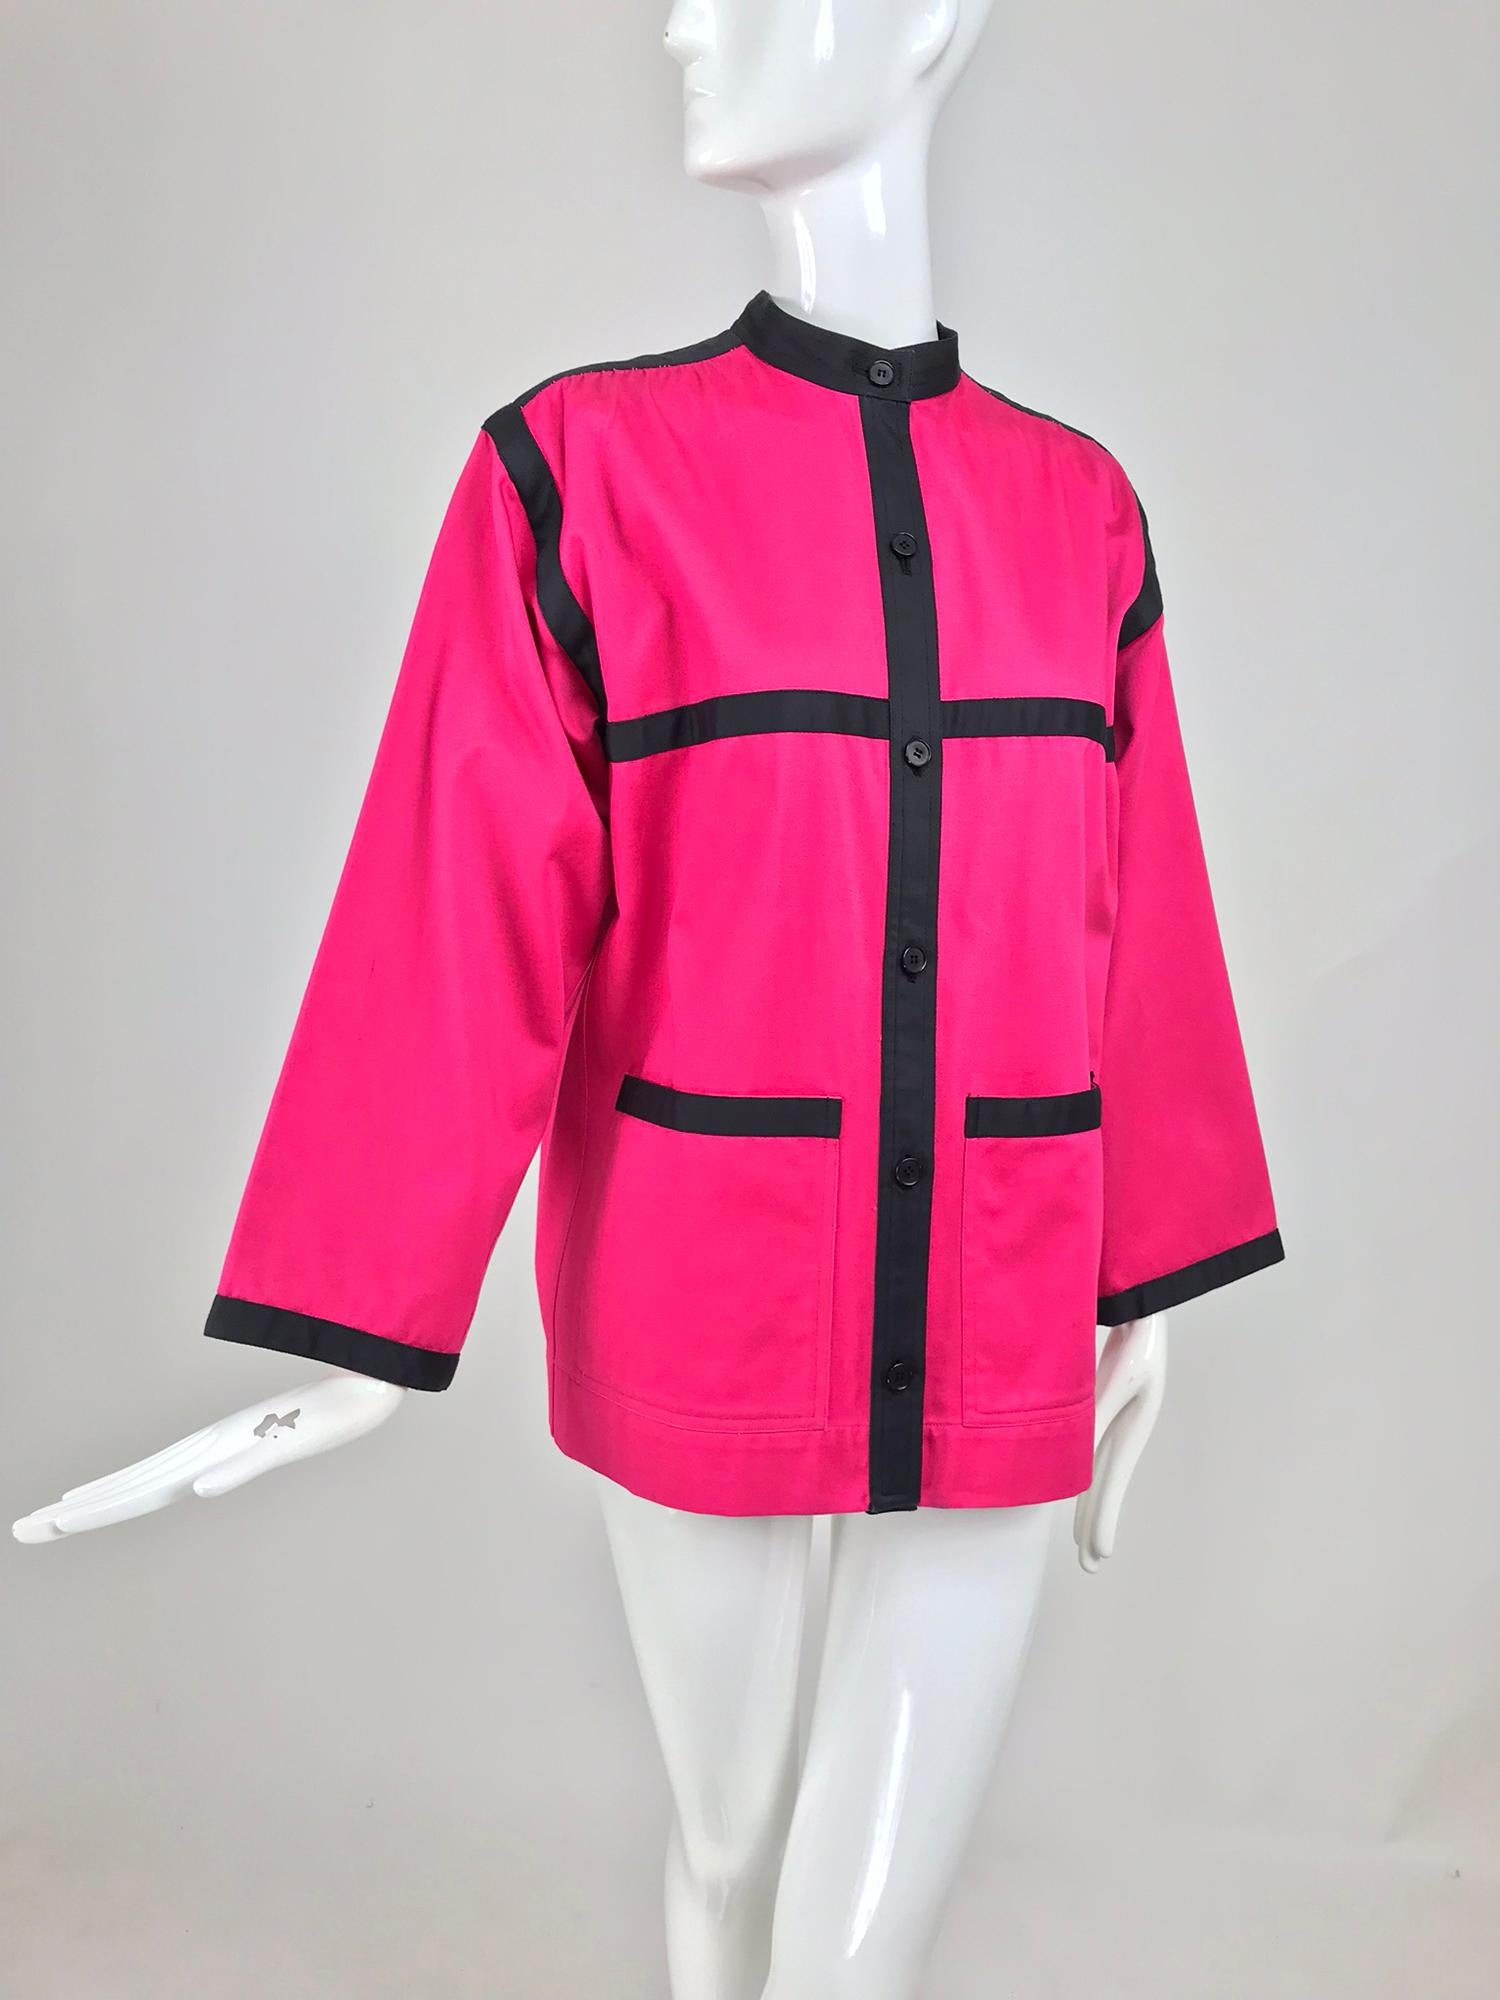 Yves Saint Laurent hot pink Mondrian style colour block jacket in cotton from the 1970s. Bold and graphic this jacket makes a statement. Clearly designed with reference to the original Saint Laurent Haute Couture Collection which was an ode to Piet